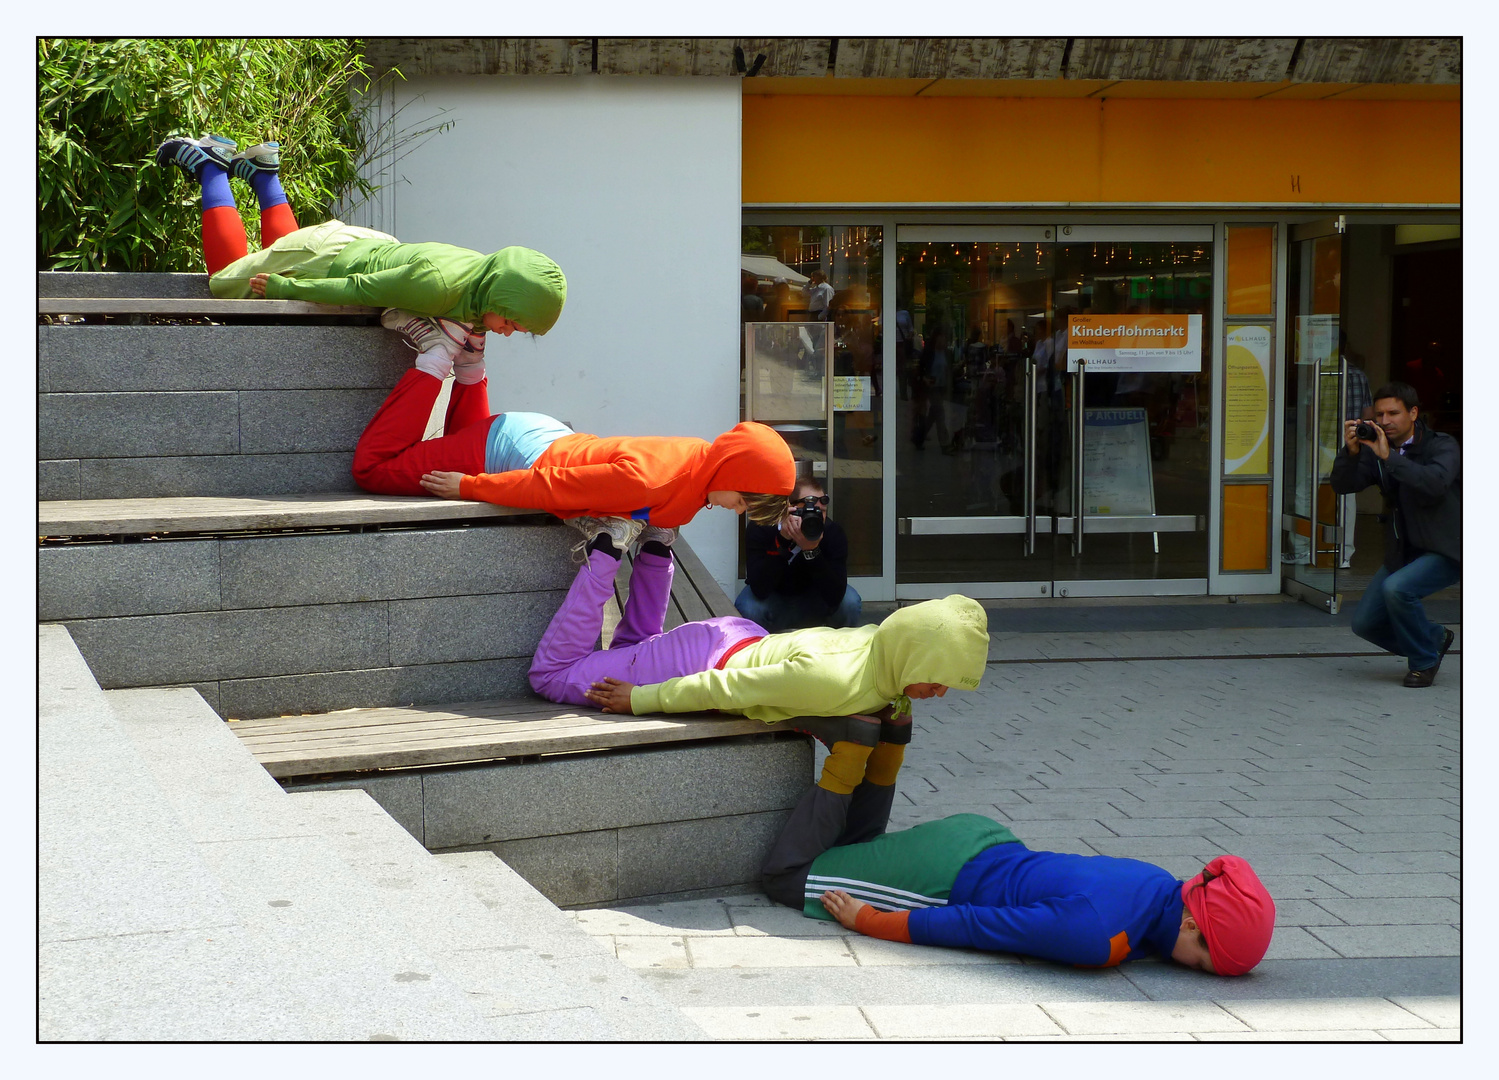 Bodies in urban Spaces